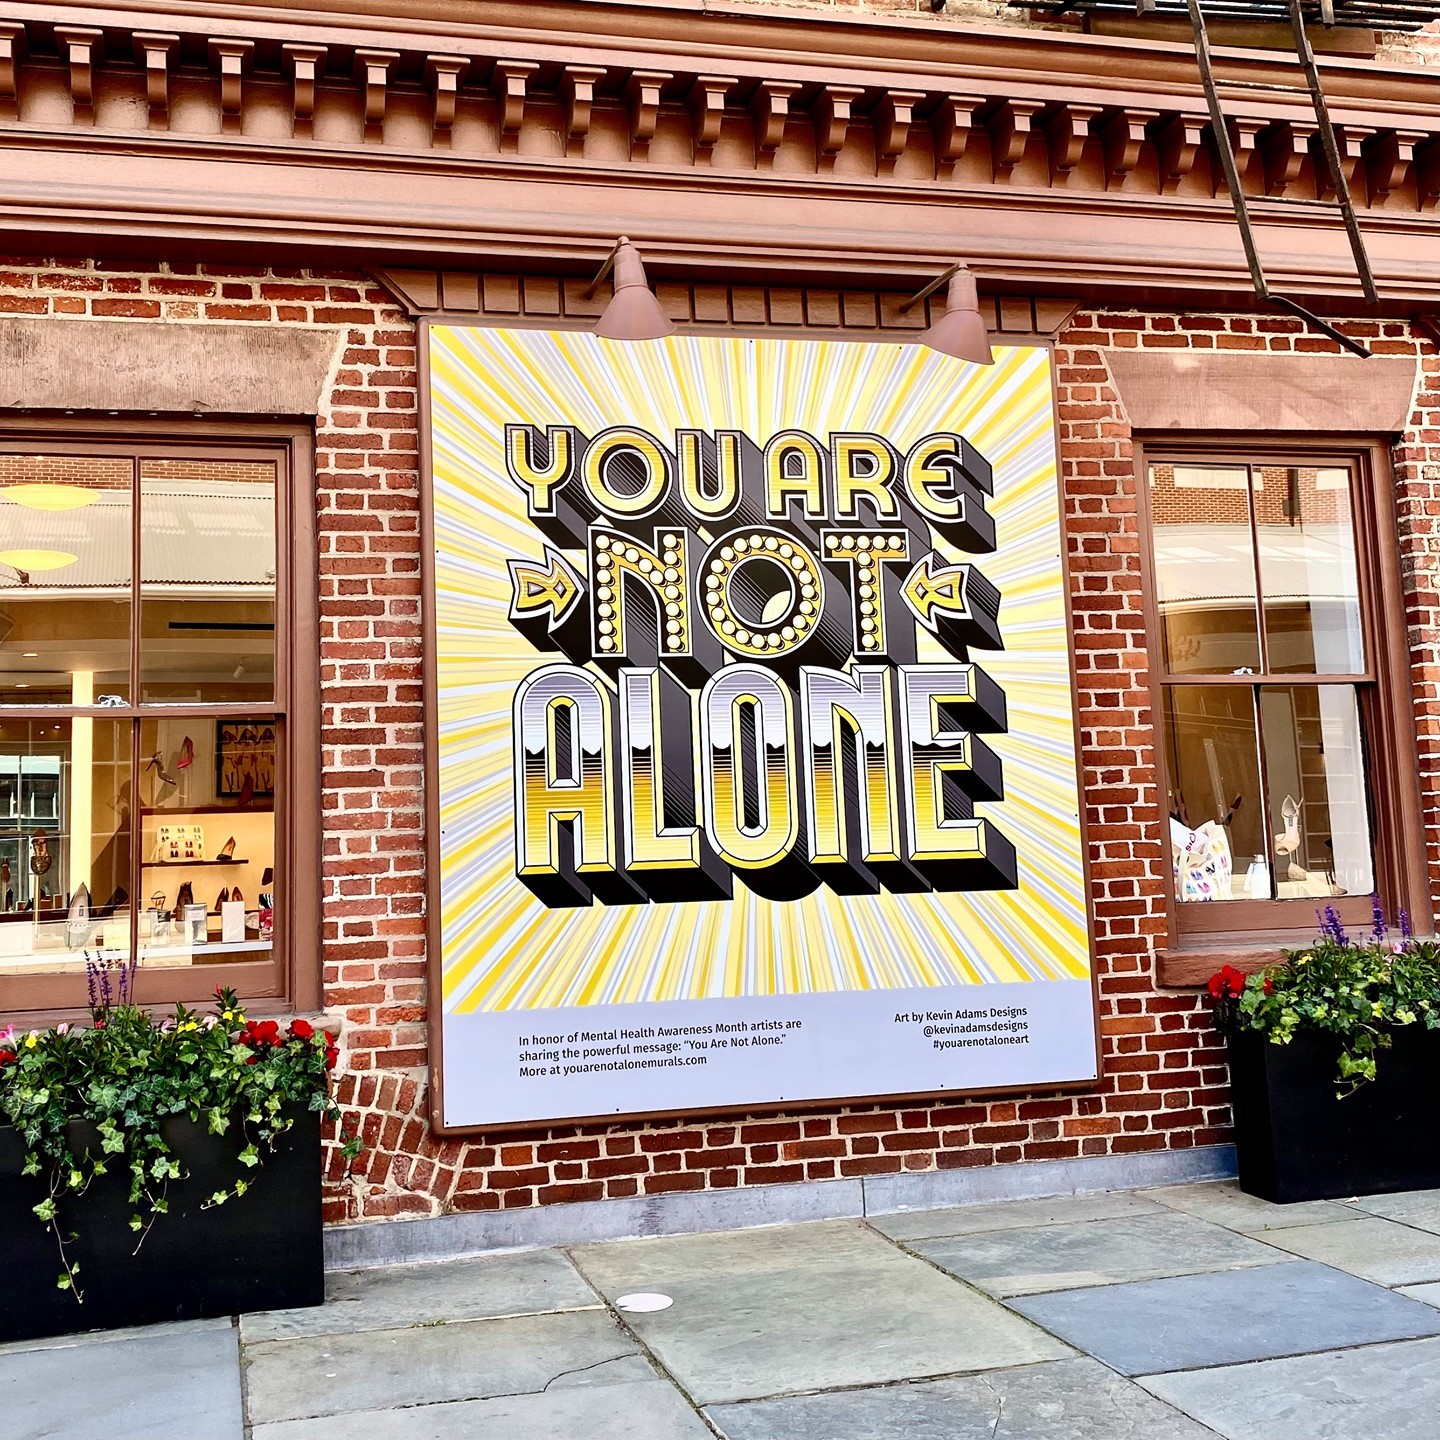 We are proud to showcase such a powerful message throughout the Seaport in collaboration with @youarenotalonemurals.  #MentalHealthAwarenessMonth #YouAreNotAloneArt : @kevinadamsdesigns